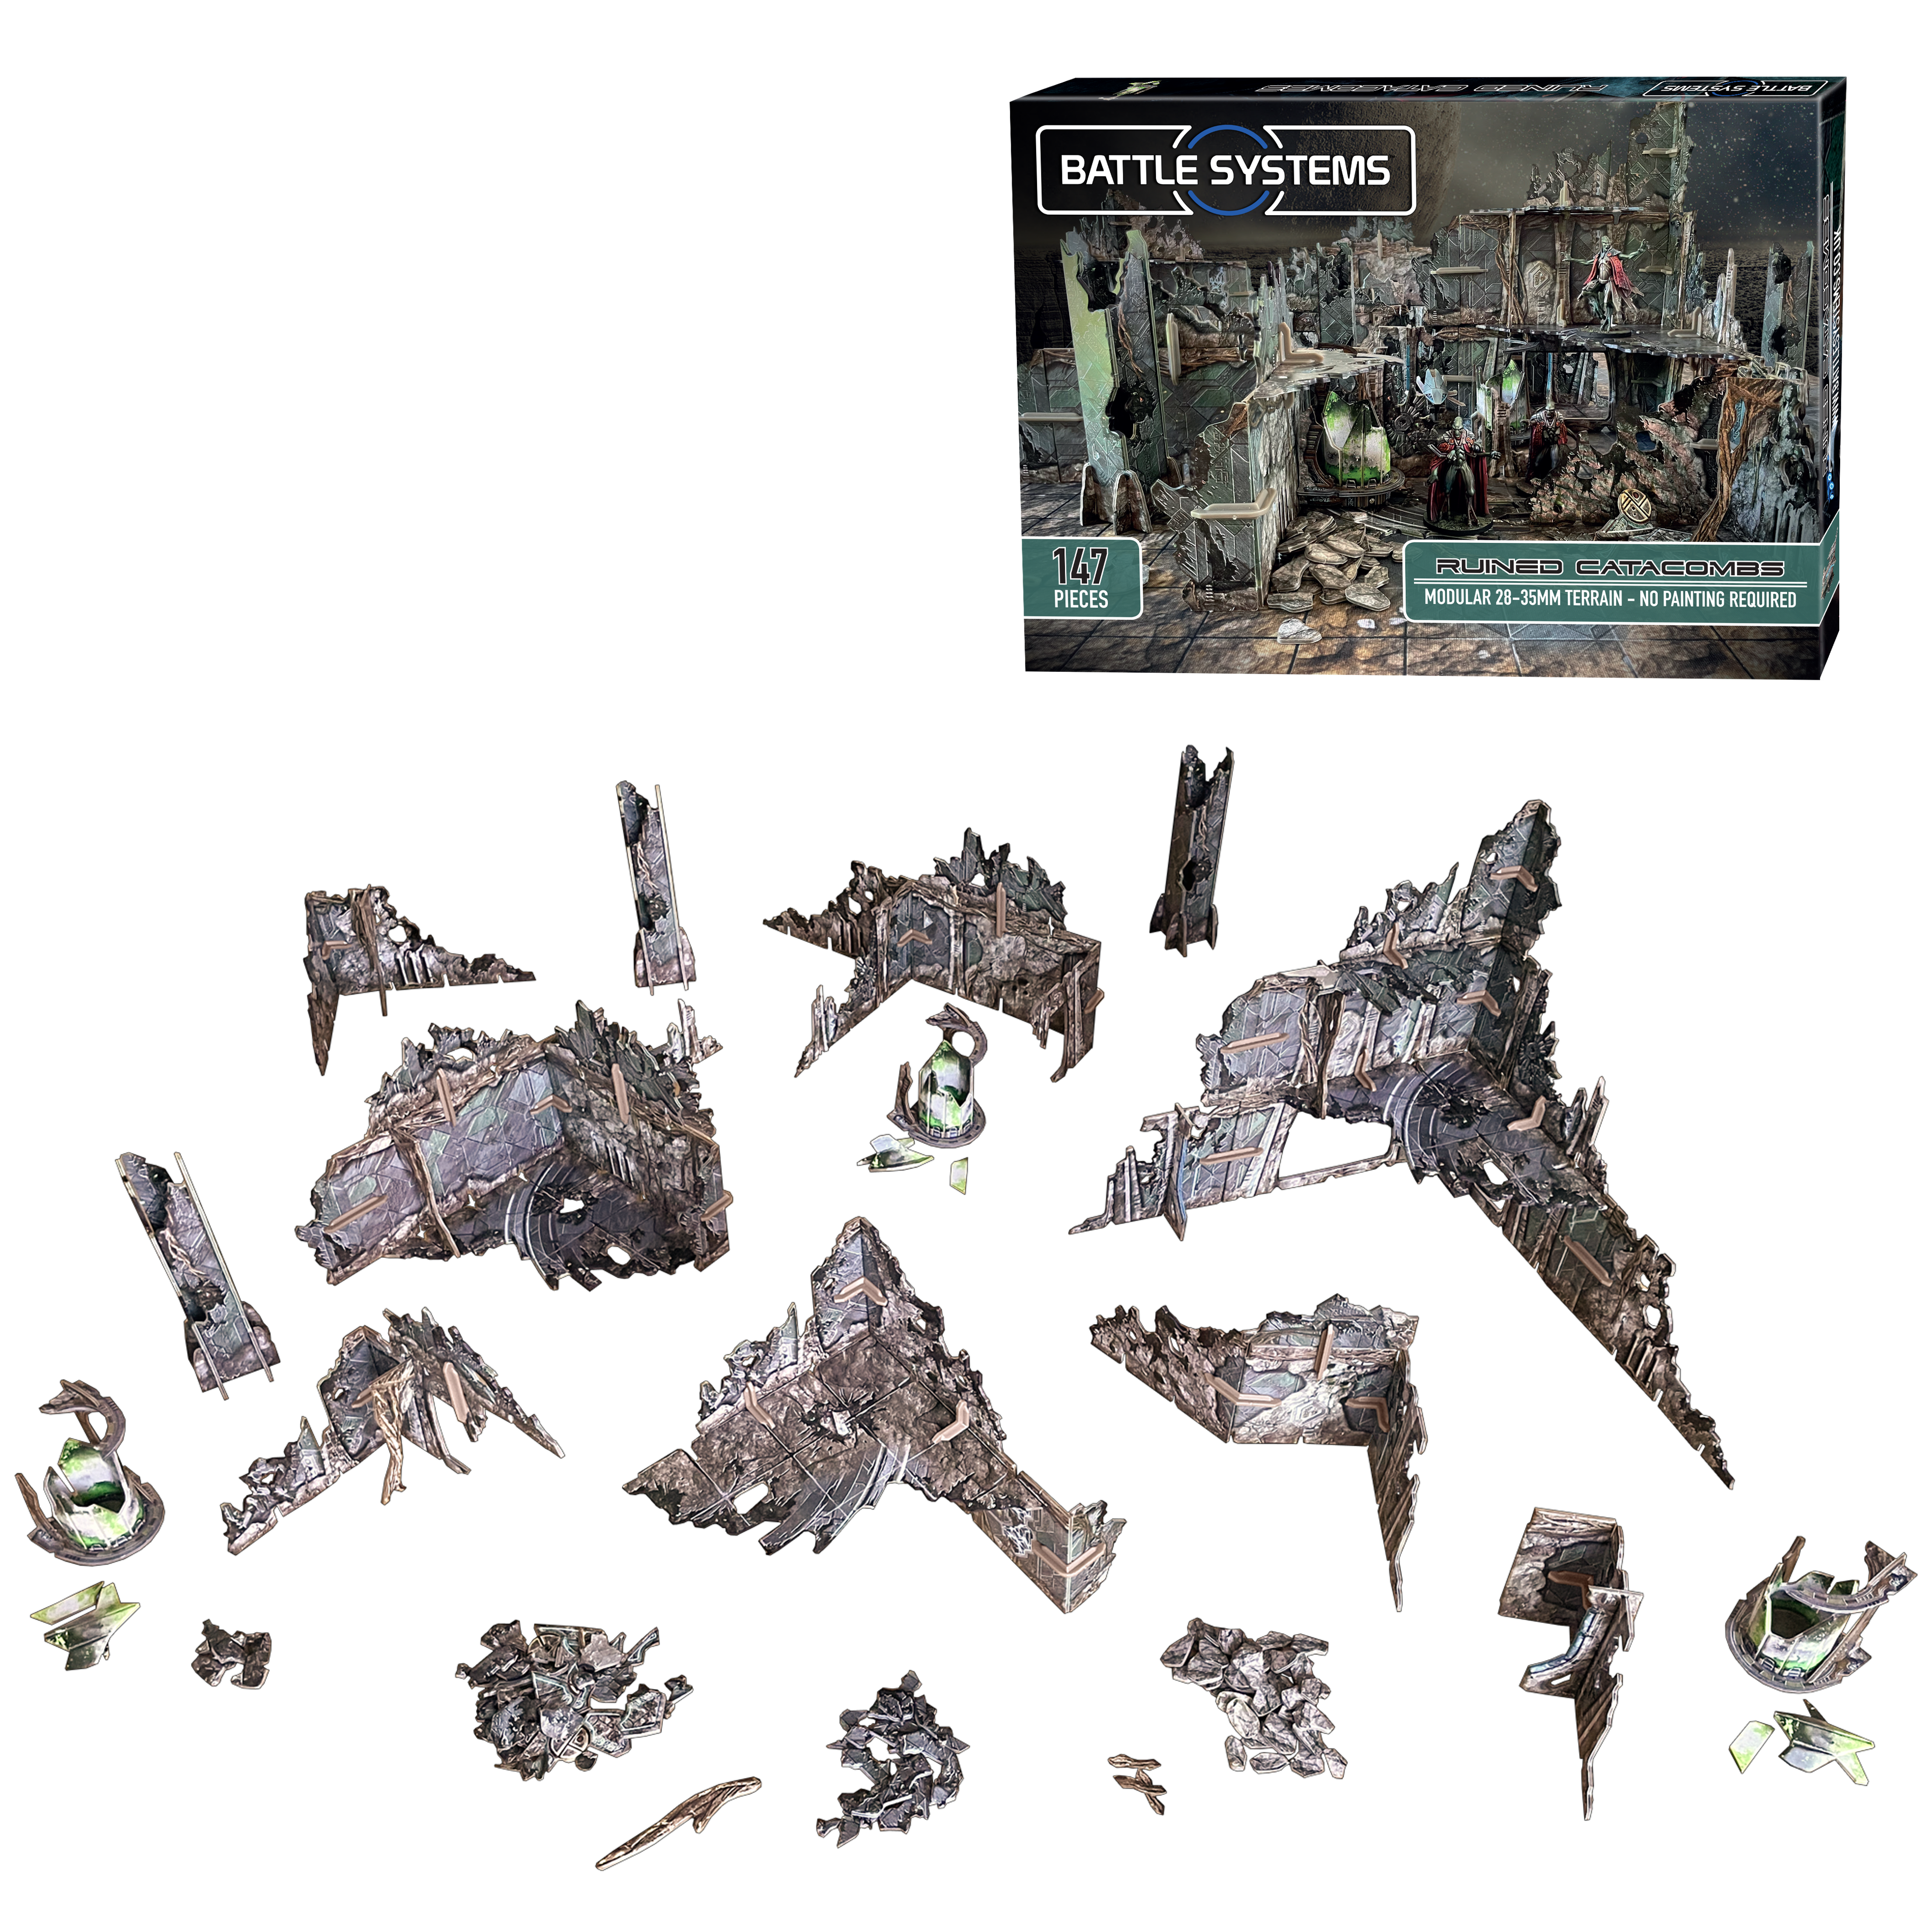 Battle Systems : Ruined Catacombs | Boutique FDB